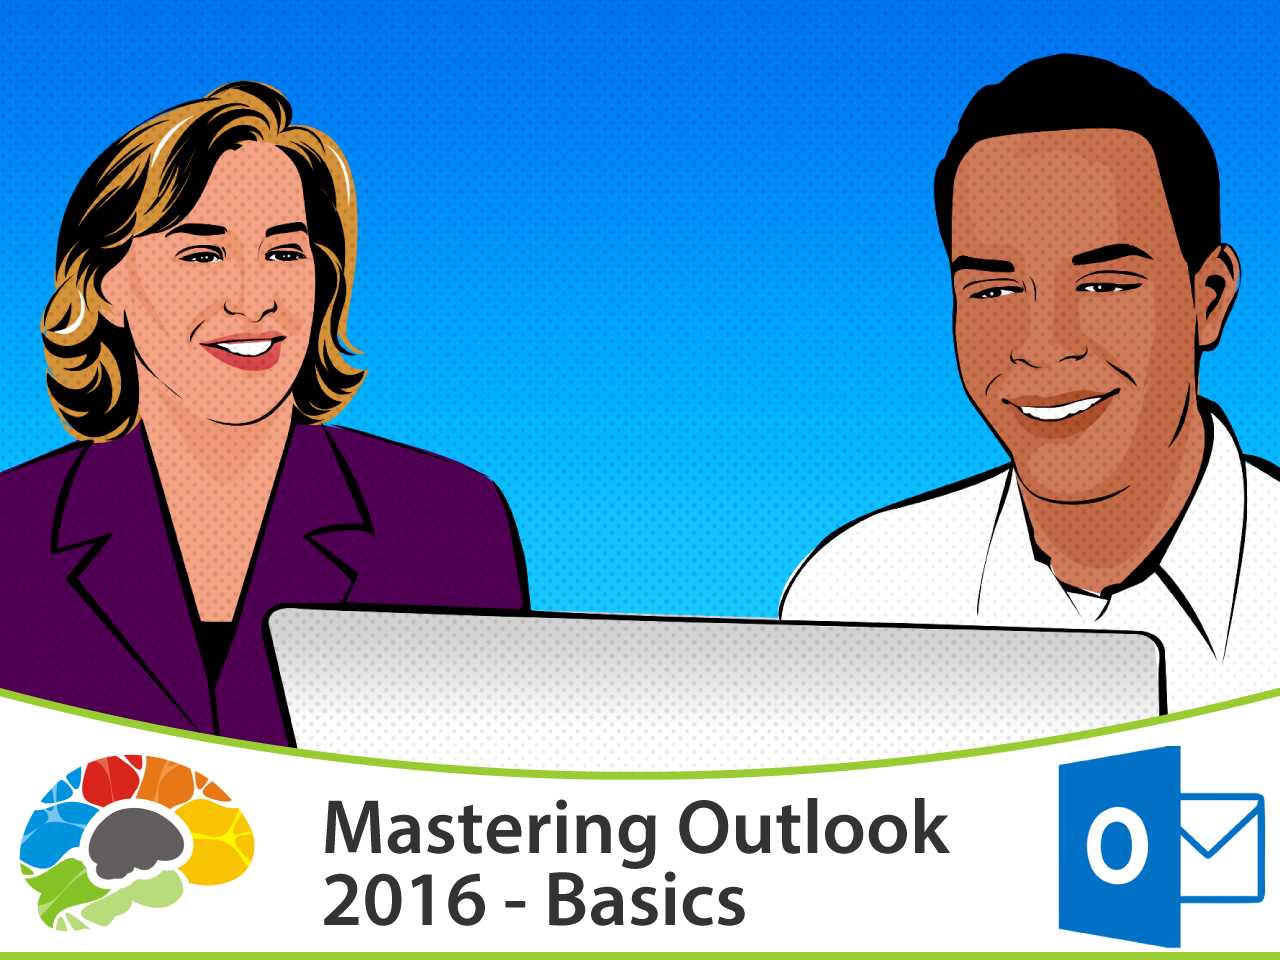 Mastering Outlook 2016 (full course), Singapore elarning online course